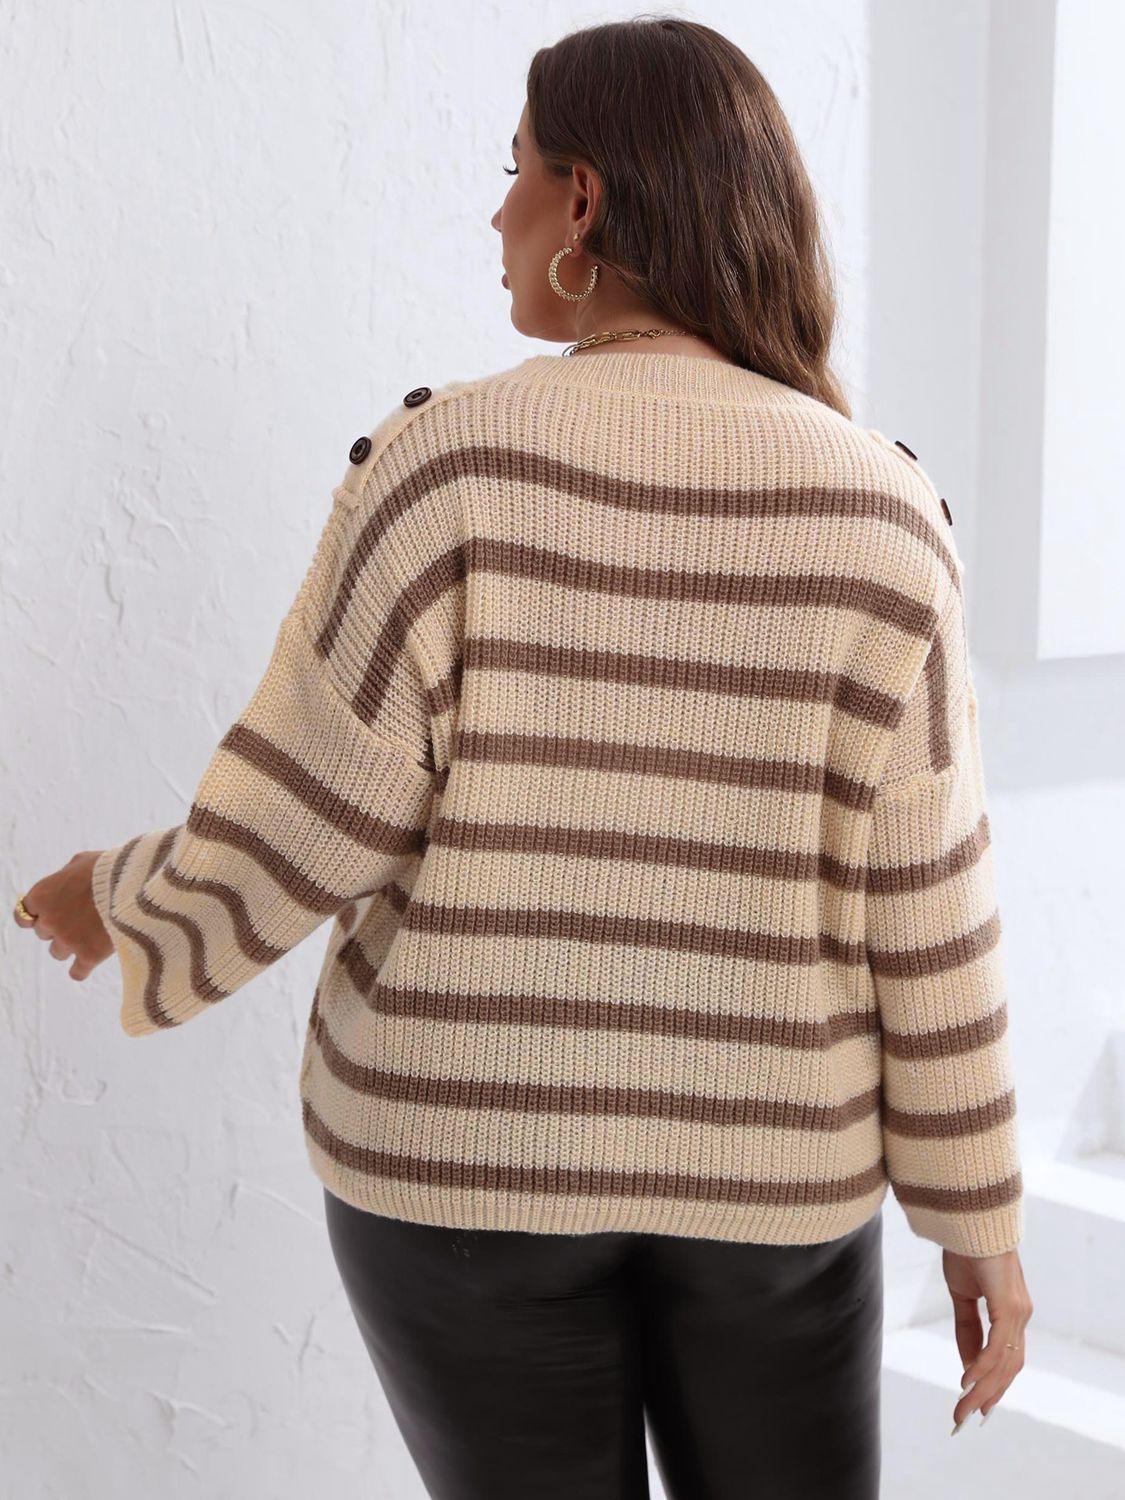 Ribbed Dropped Shoulder Plus Size Striped Sweater - MXSTUDIO.COM